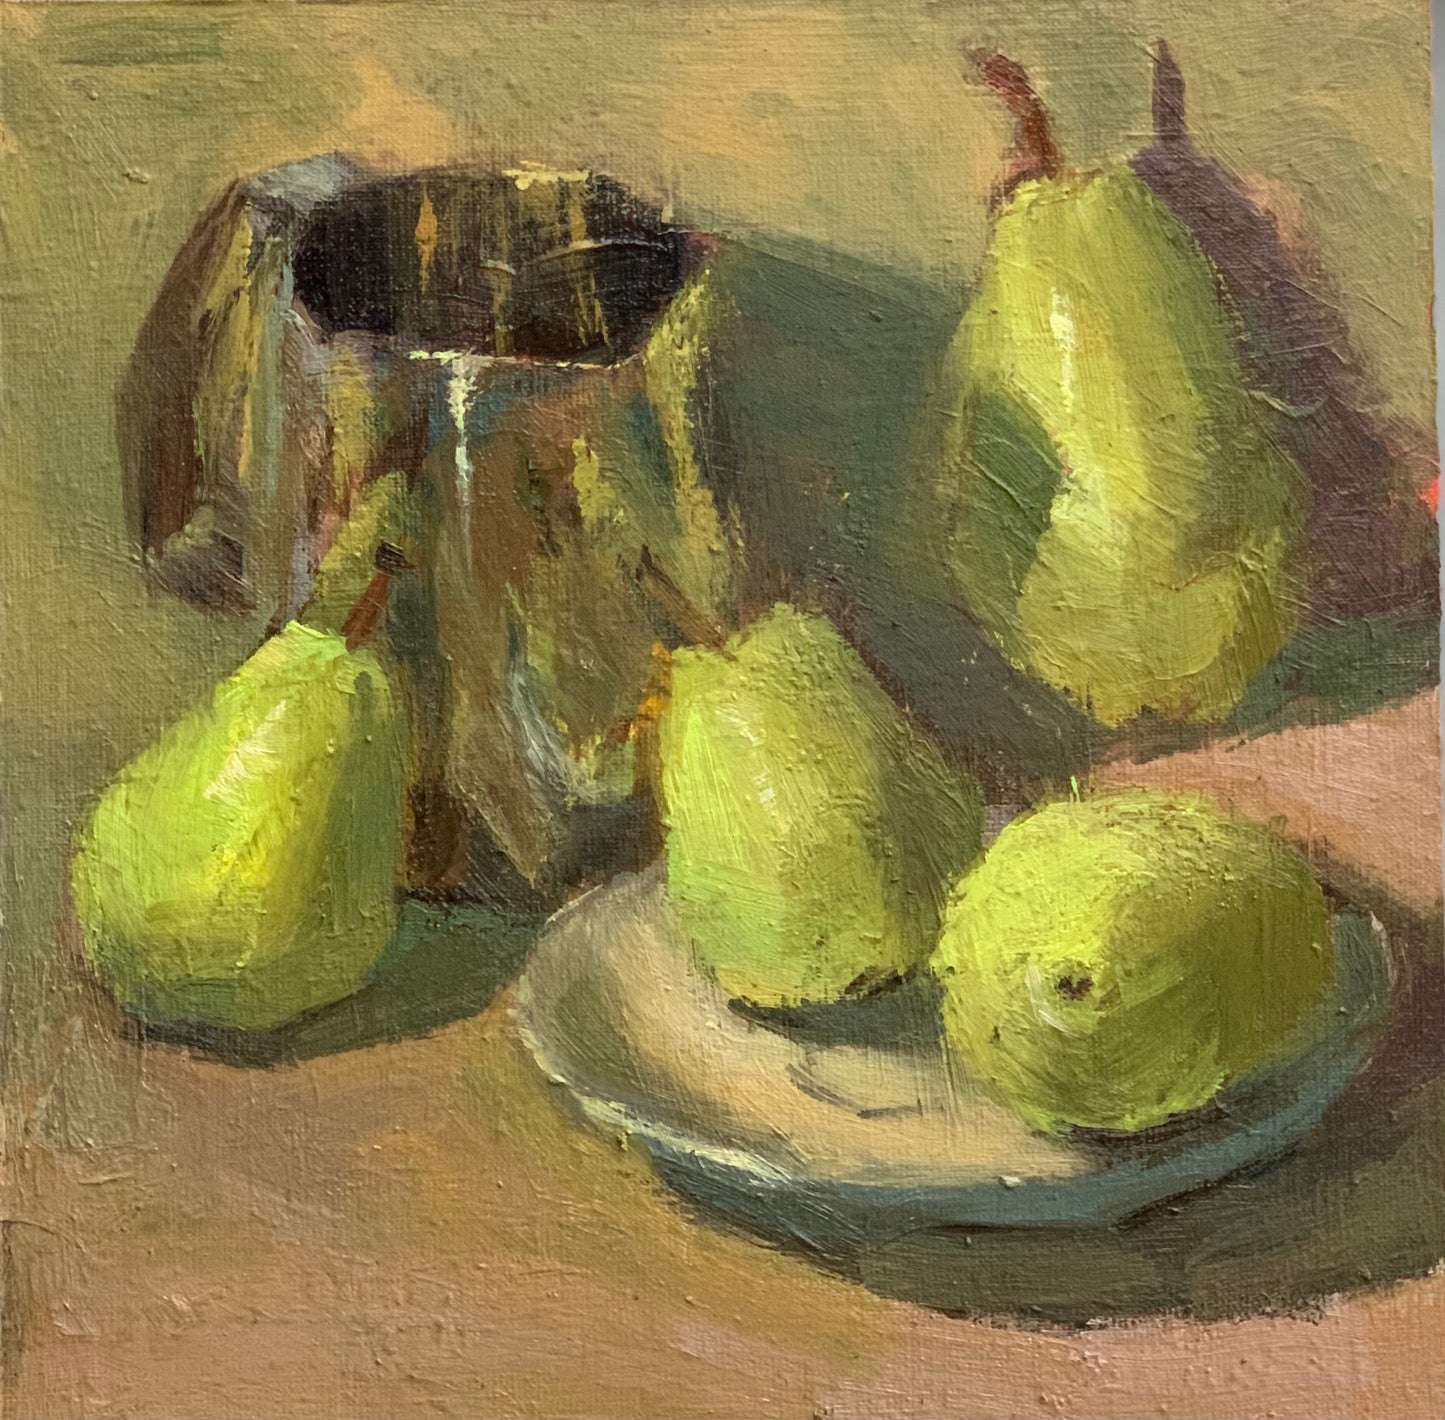 Original Oil Painting - Green Pears and Creamer